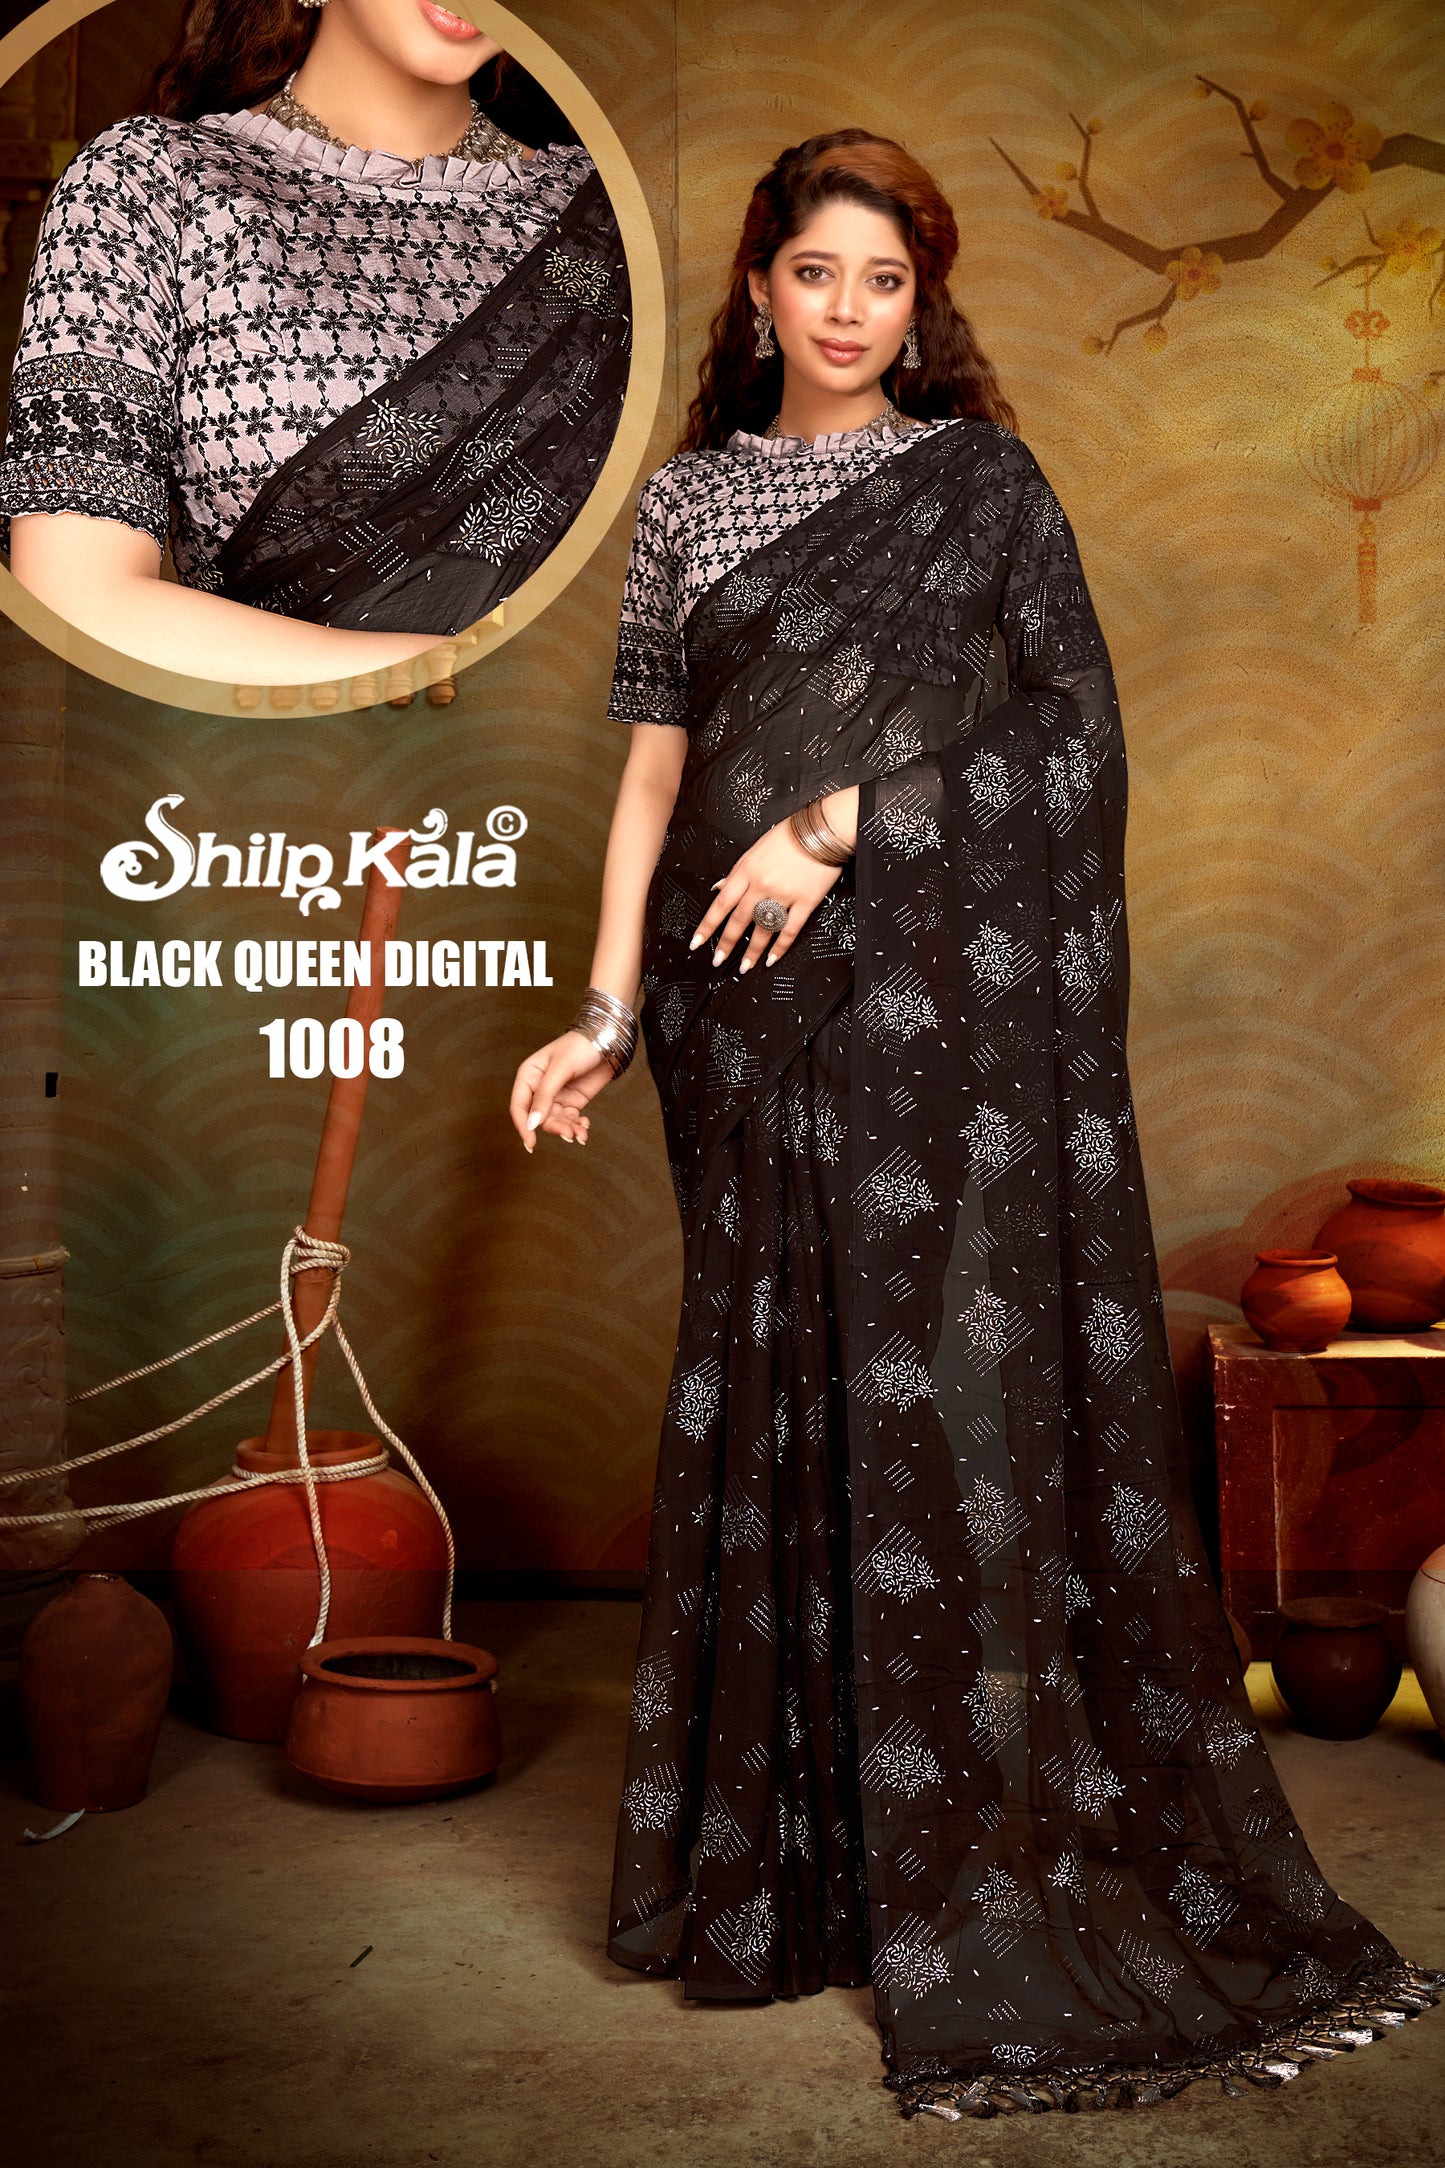 Black Queen Multicolor Chiffon Saree with Fancy Blouse and Tone to Tone Colour Matching